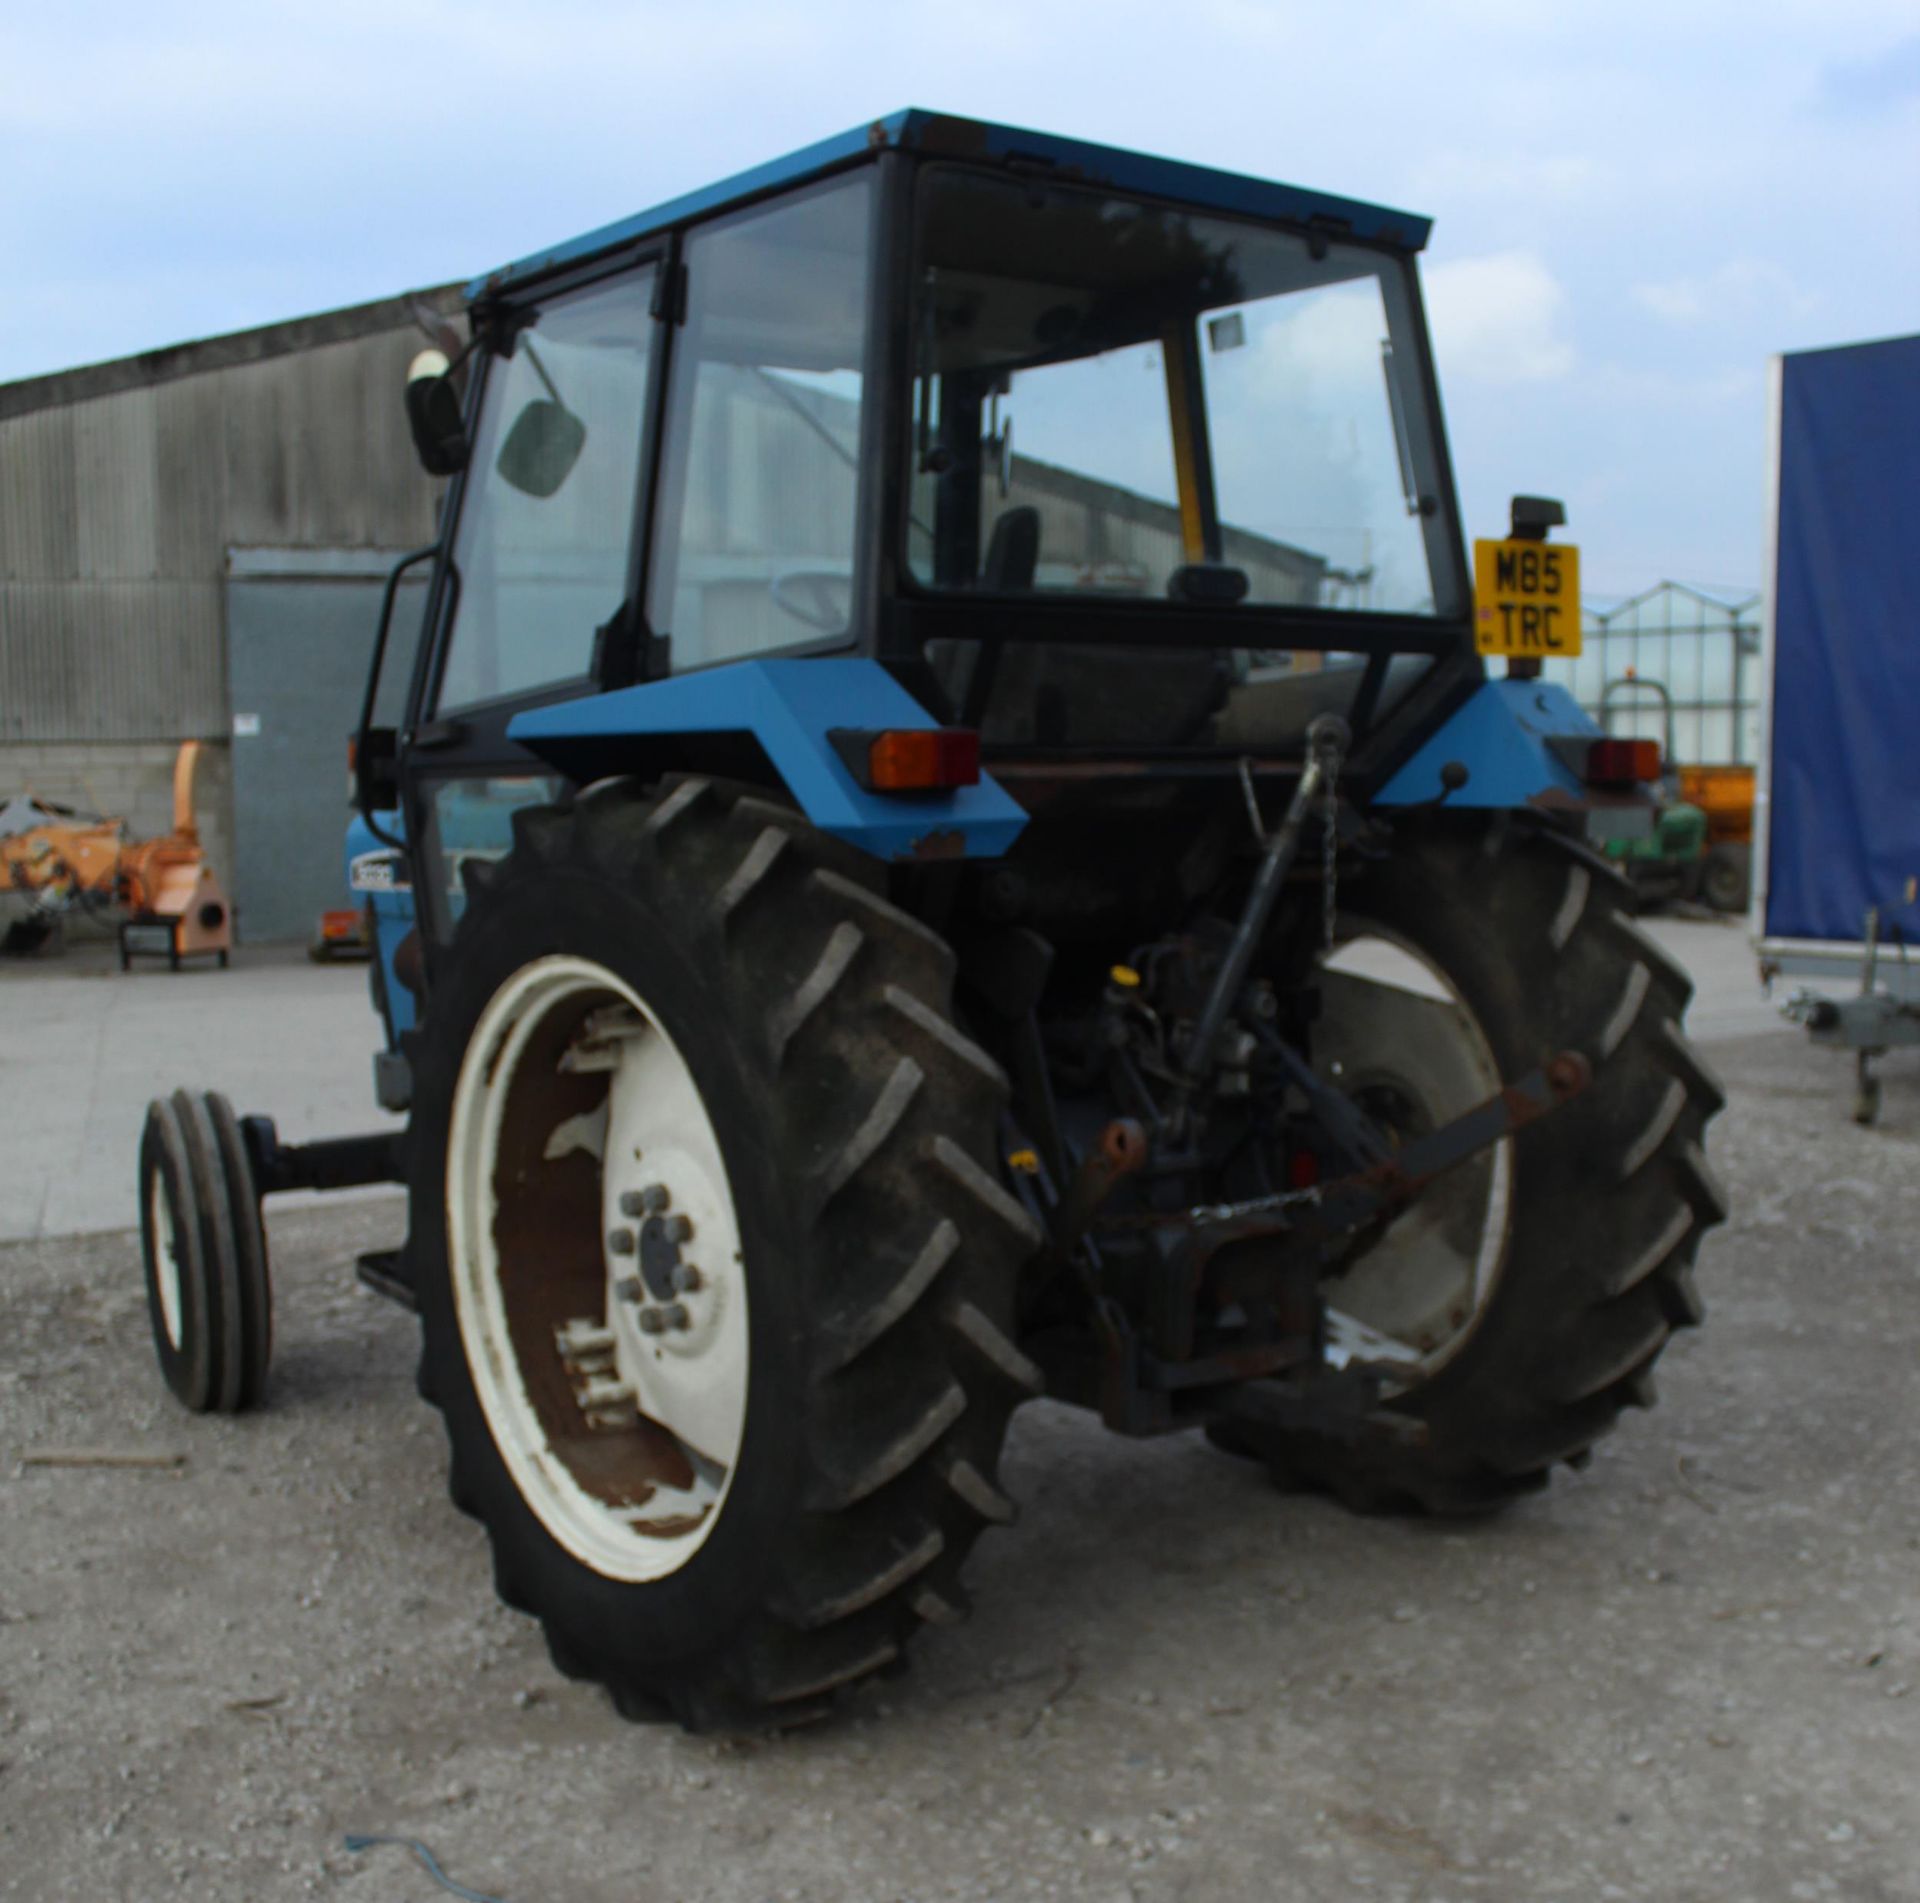 FORD 5030 2 WHEEL DRIVE TRACTOR 9014 HOURS ONE OWNER FROM NEW REG.NO. M85 TRC FIRST REG 01/06/95 - Image 6 of 13